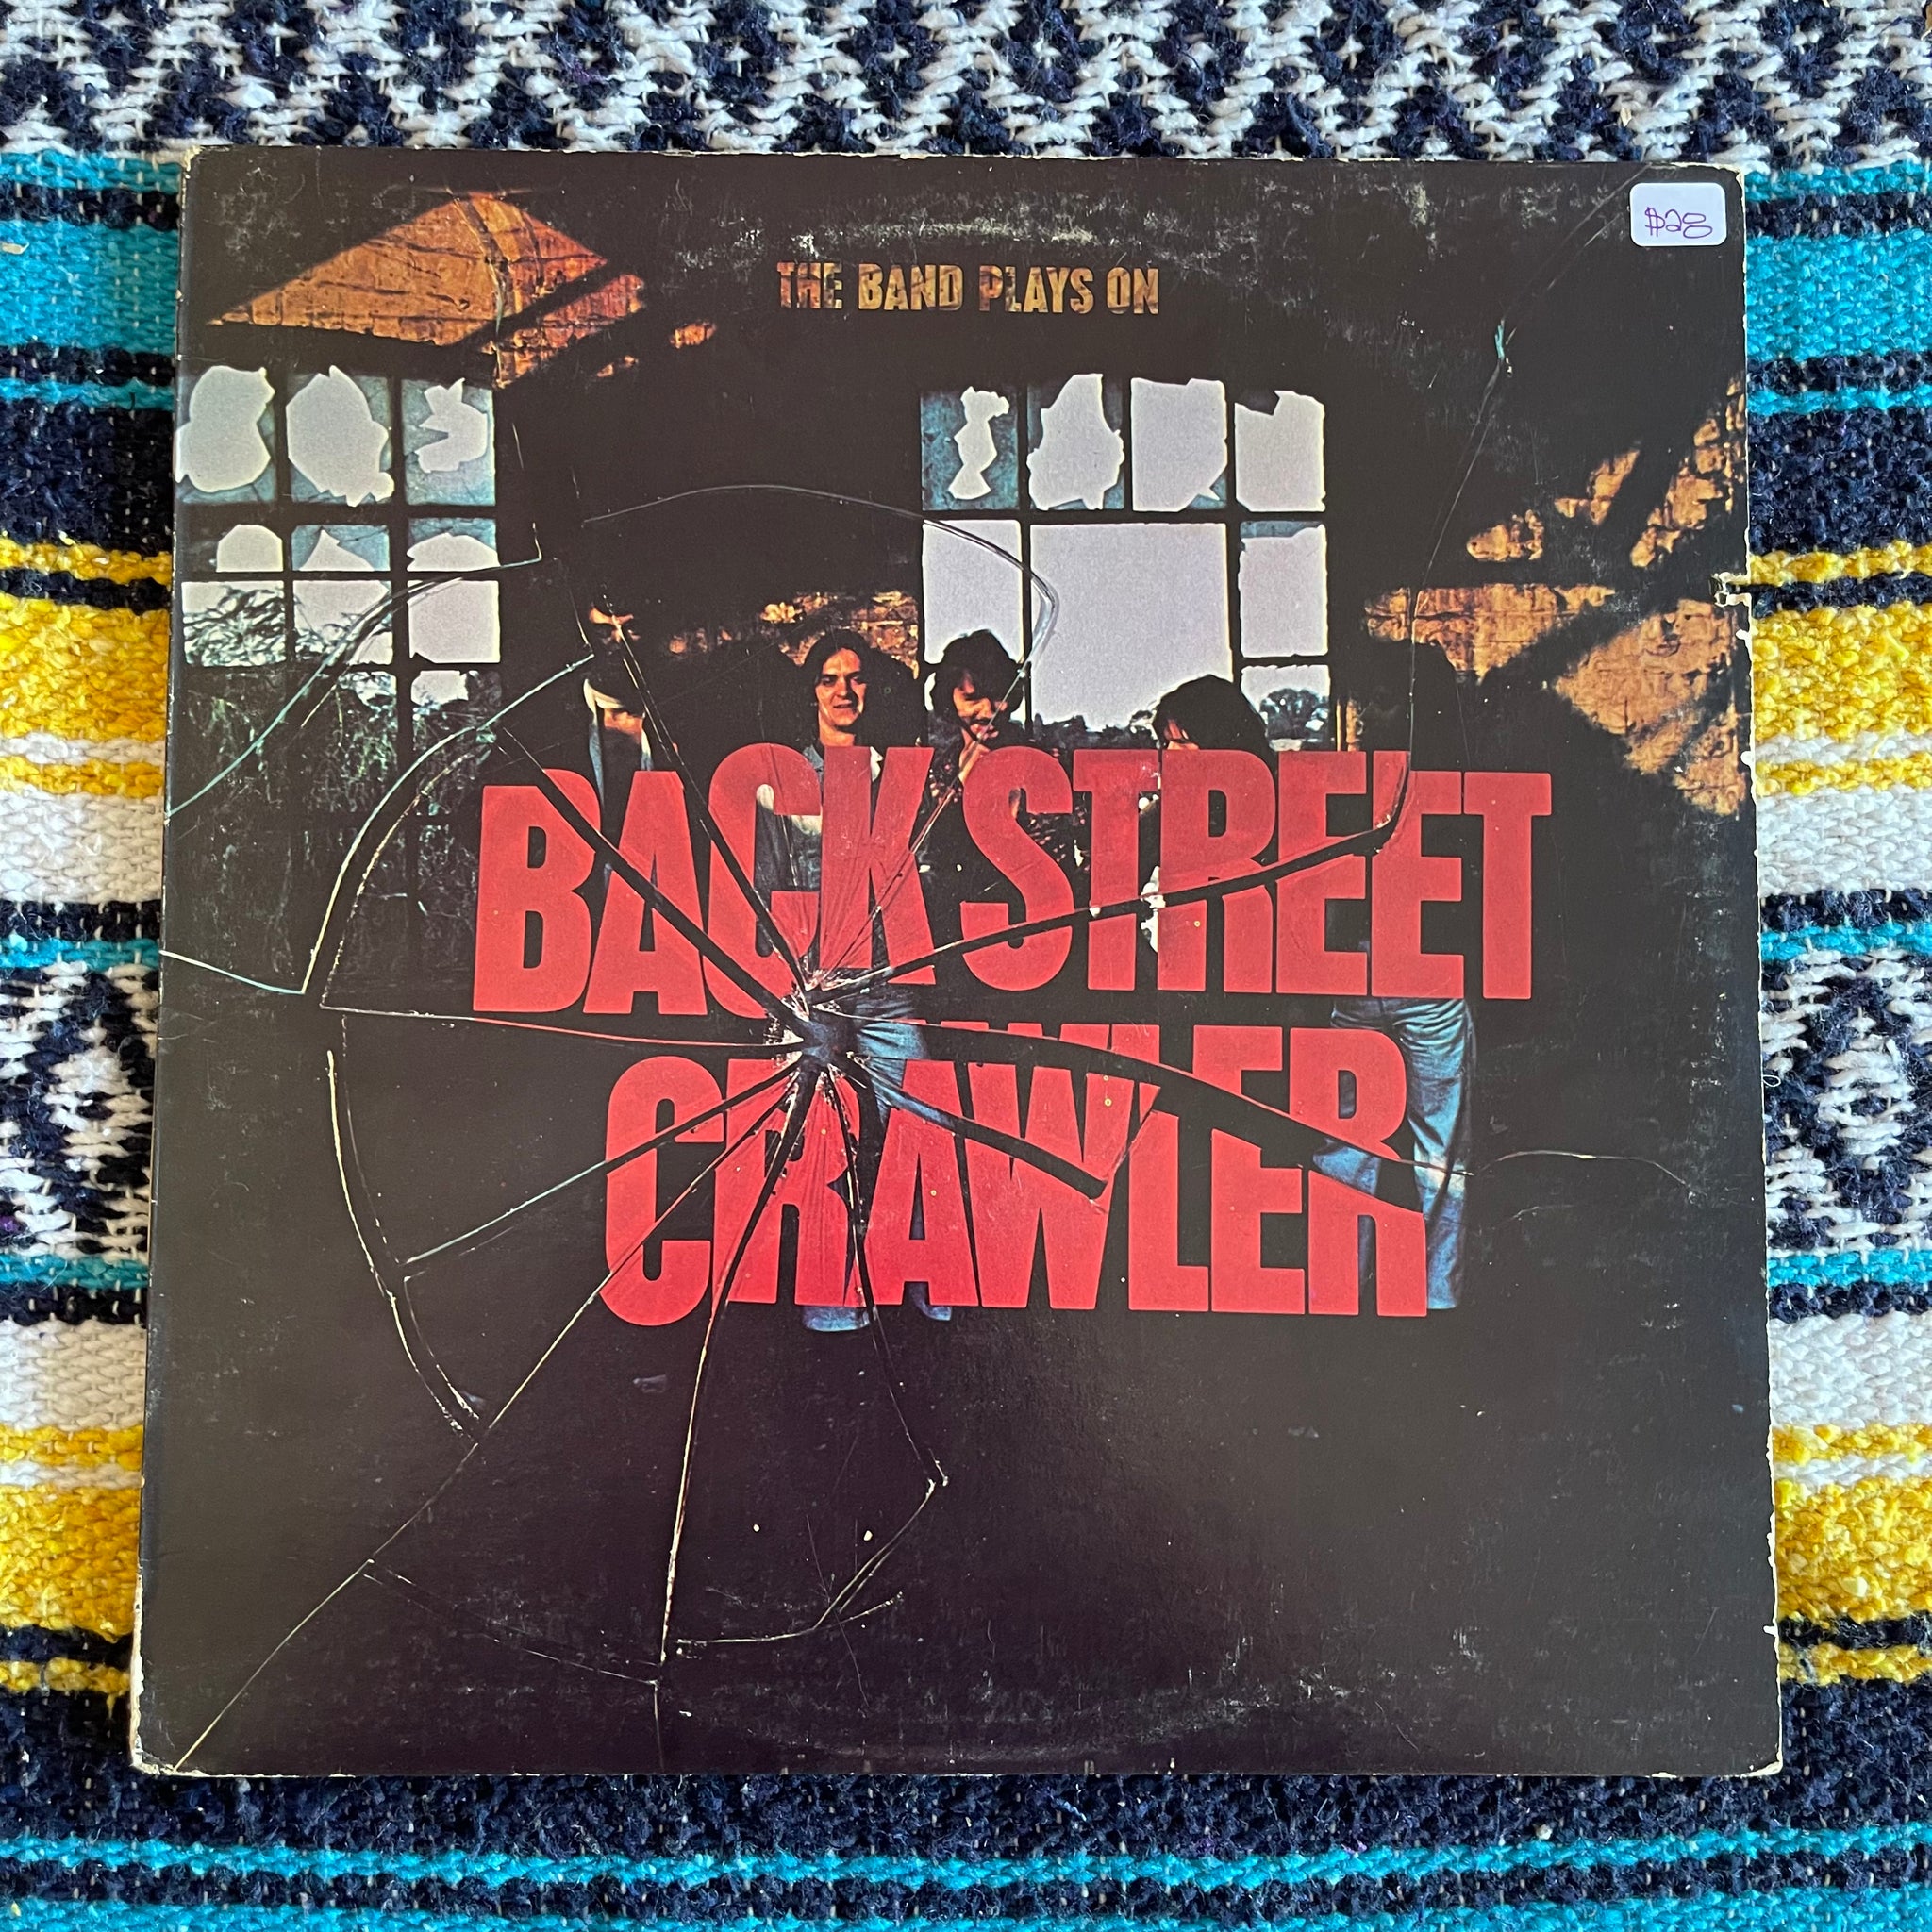 Back Street Crawler-The Band Plays On